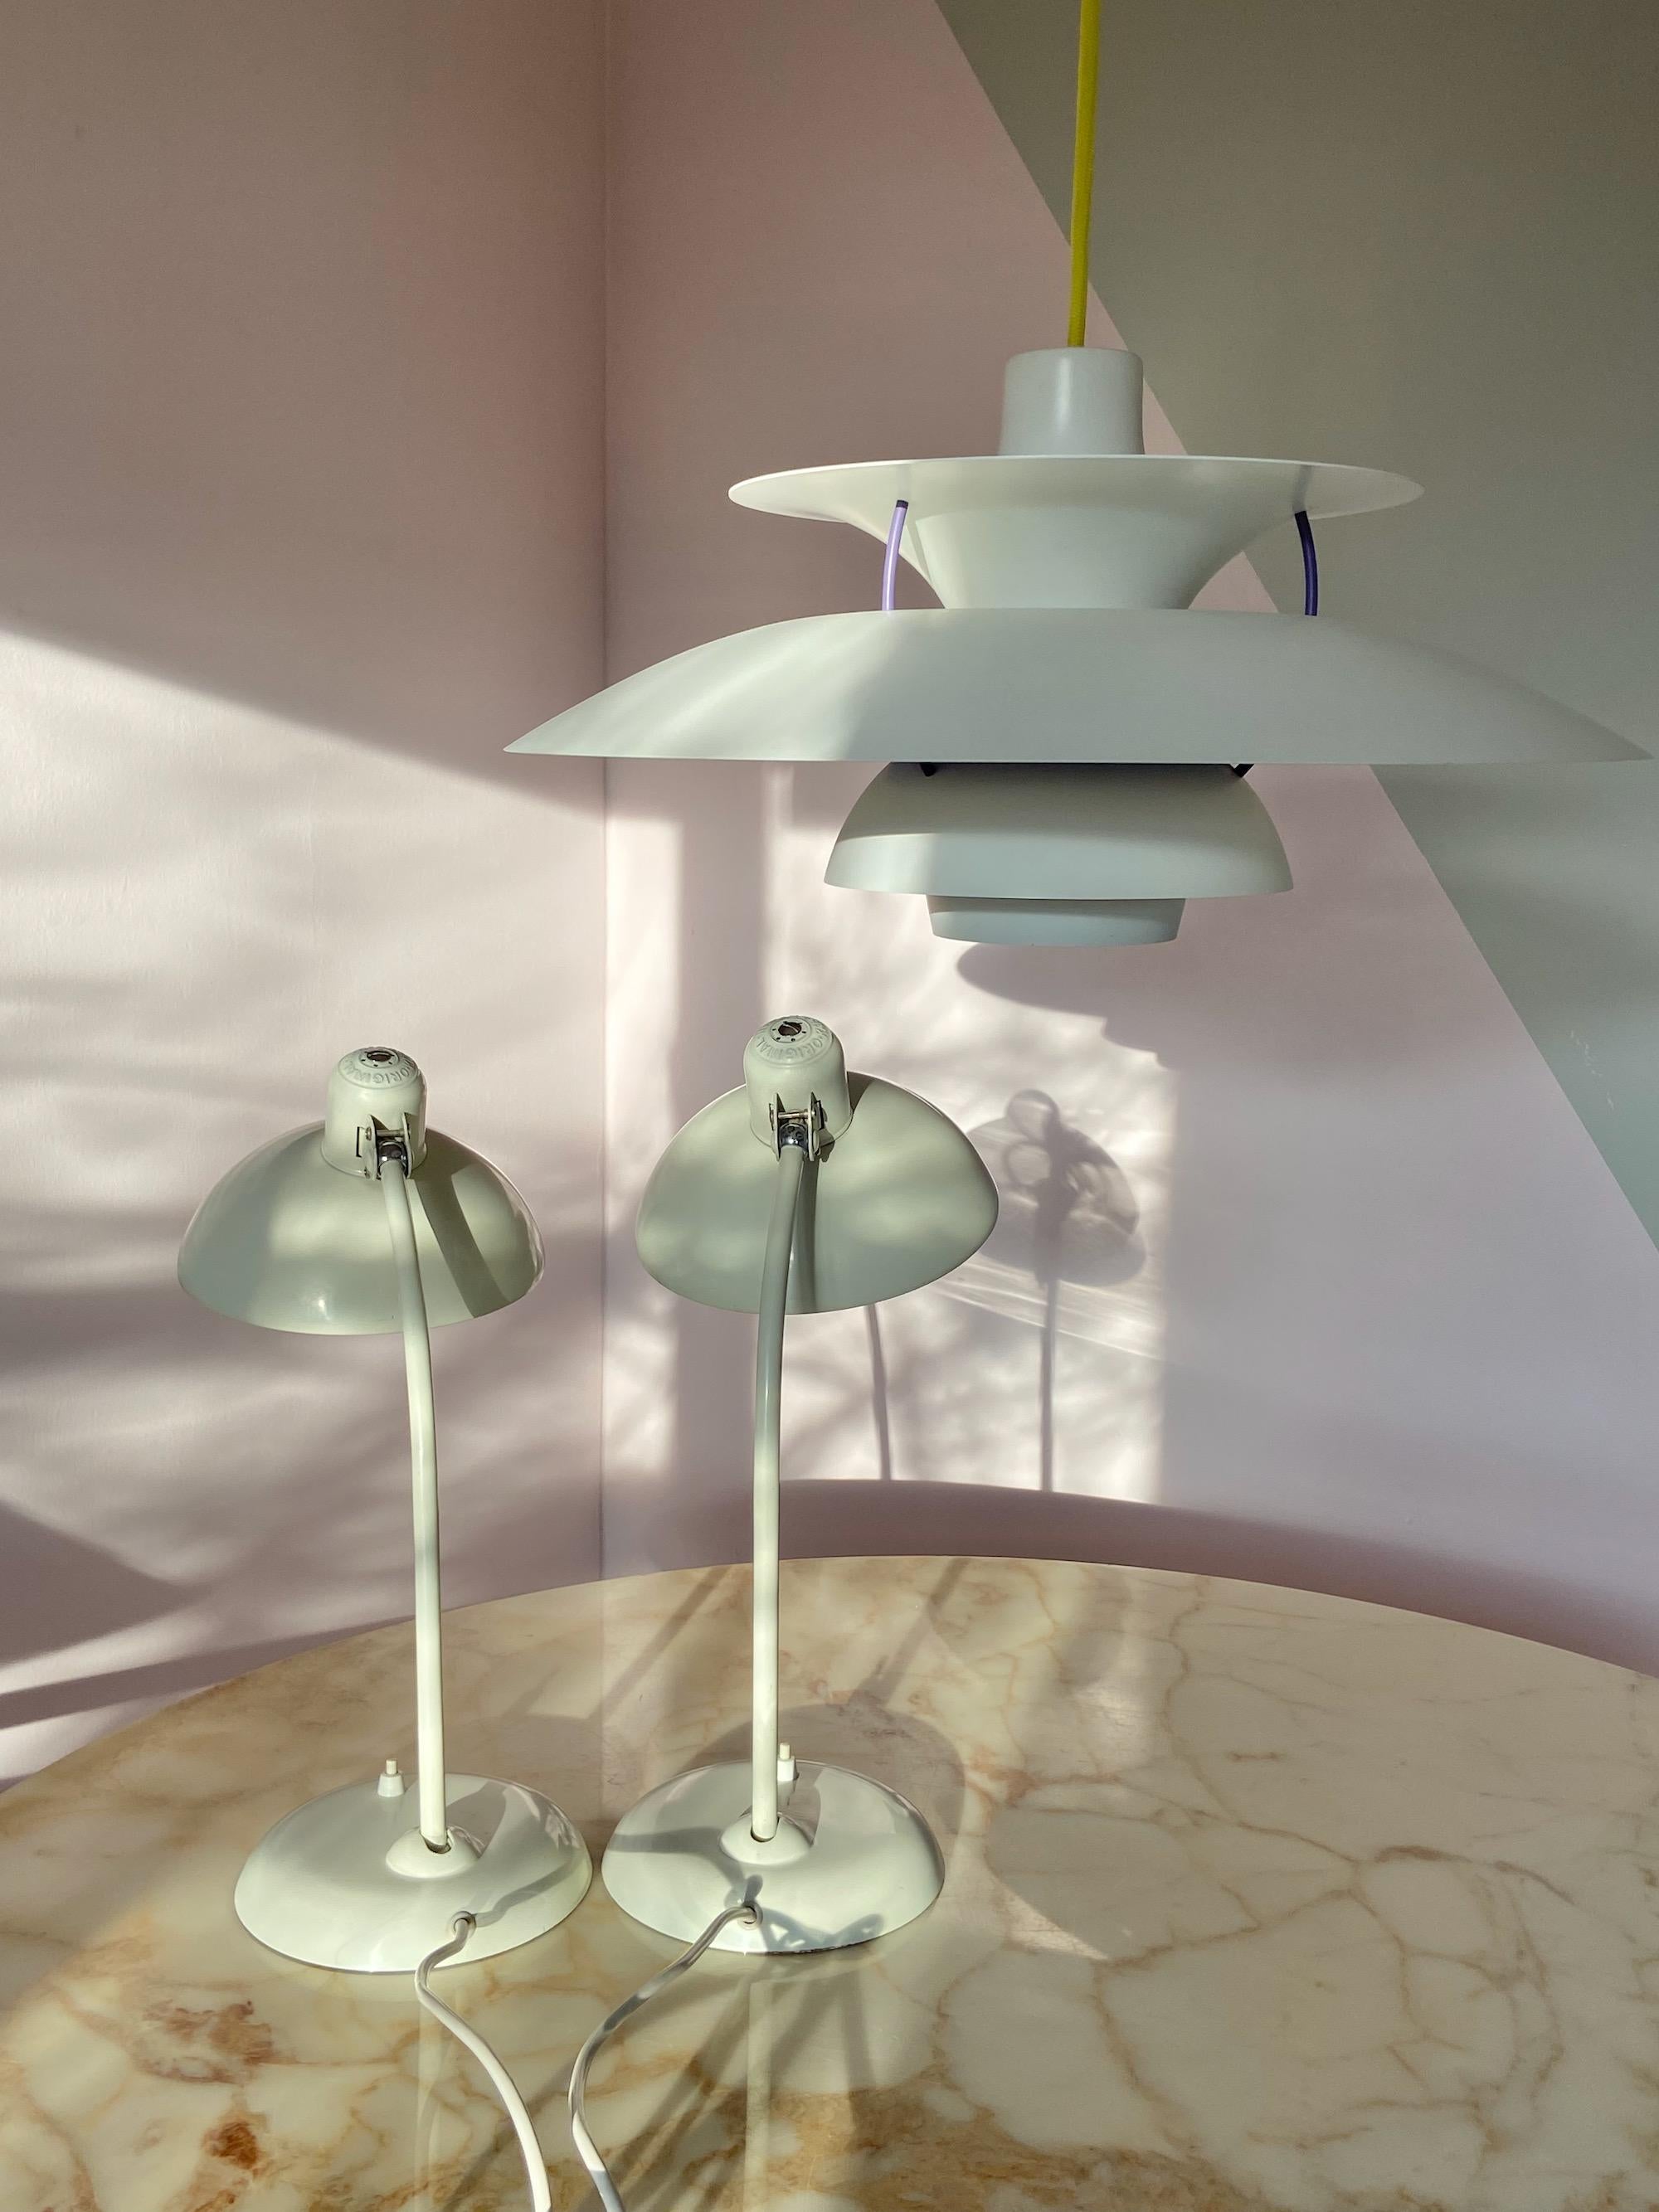 Set of 2 Christian dell desk lamps model 6556 for Kaiser Idell, Germany. Arm and shade adjustable. With E26/27 Edison screw socket. 
The lamps are since the beginning together so they are from the same production date, in the same white color and